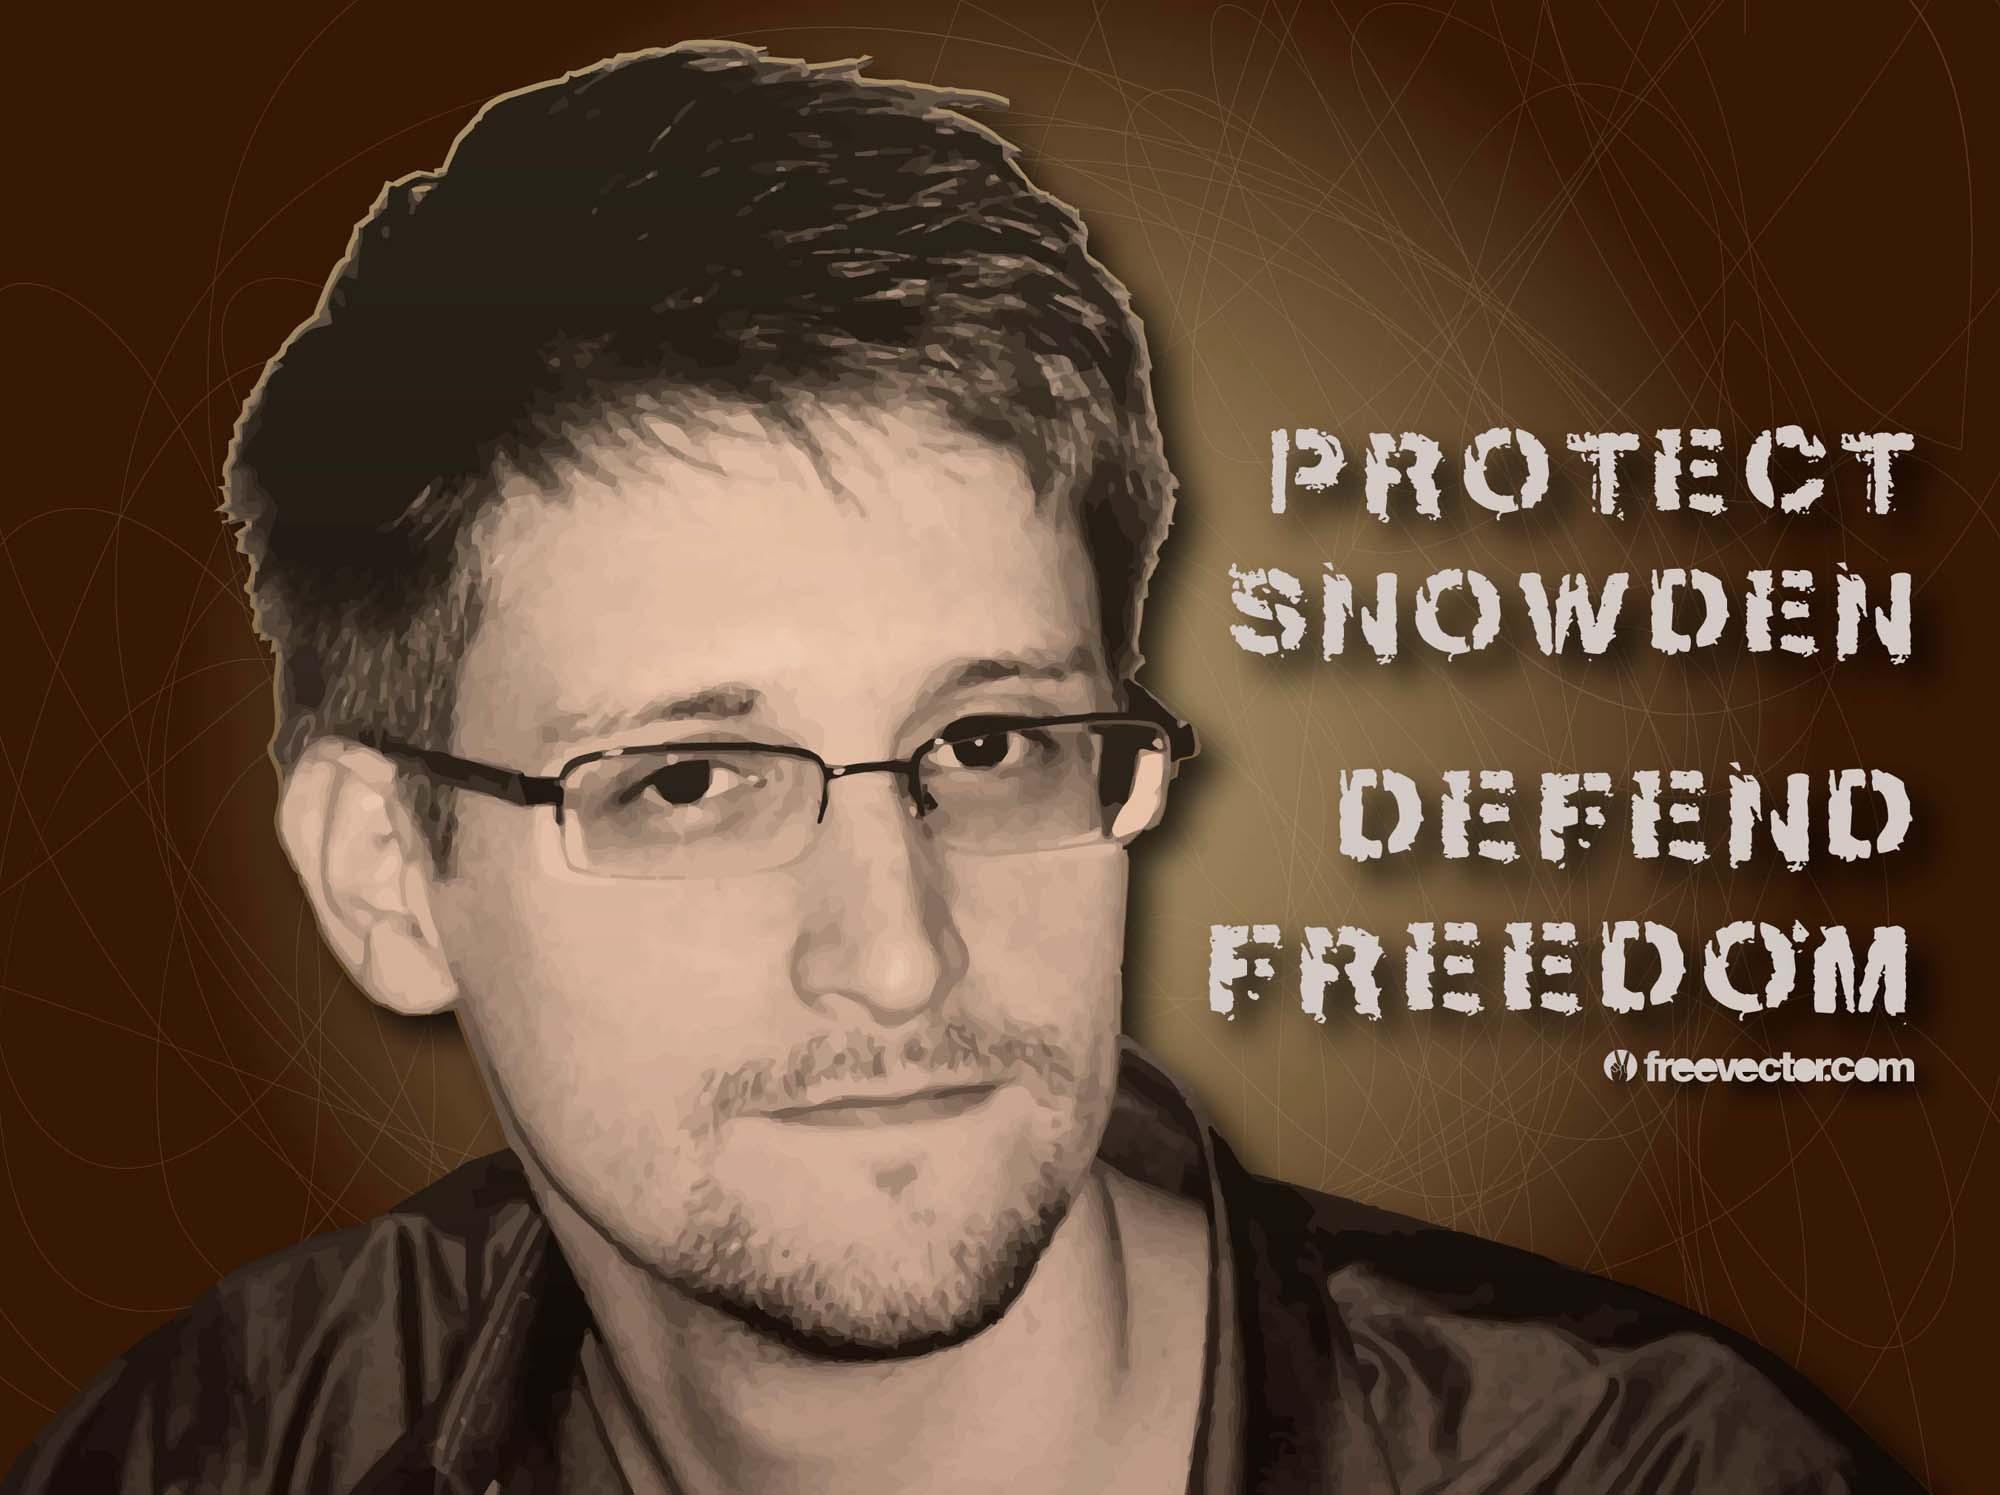 Edward Snowden Wallpaper and Background Image